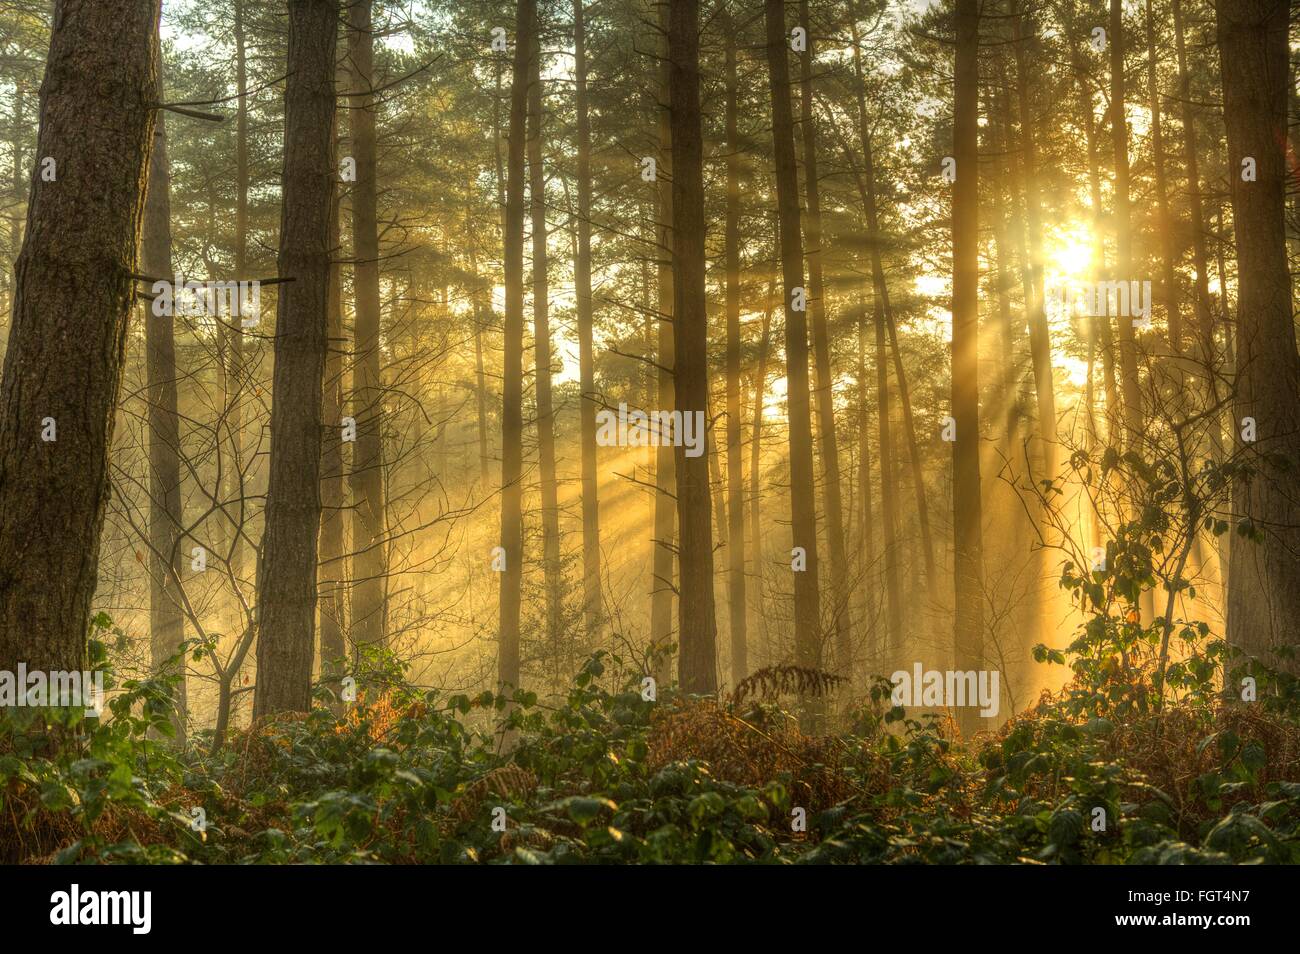 English Autunno Forest Glade Foto Stock